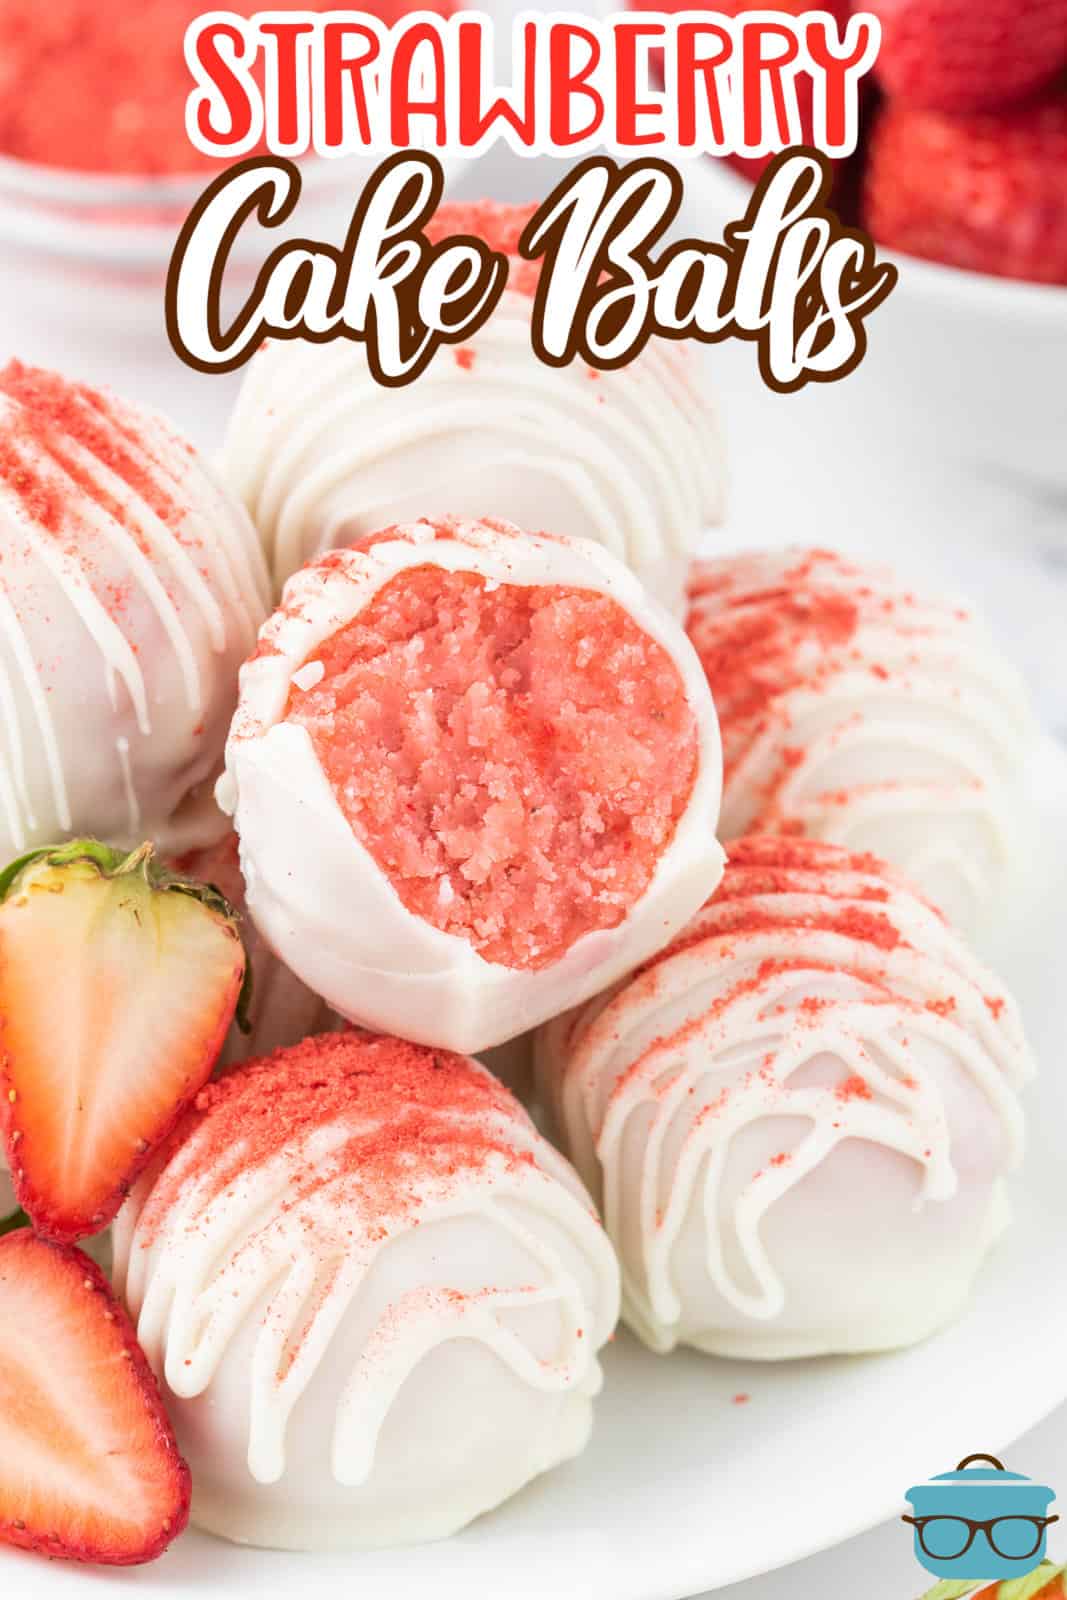 A pile of a few Strawberry Cake Balls on a plate.